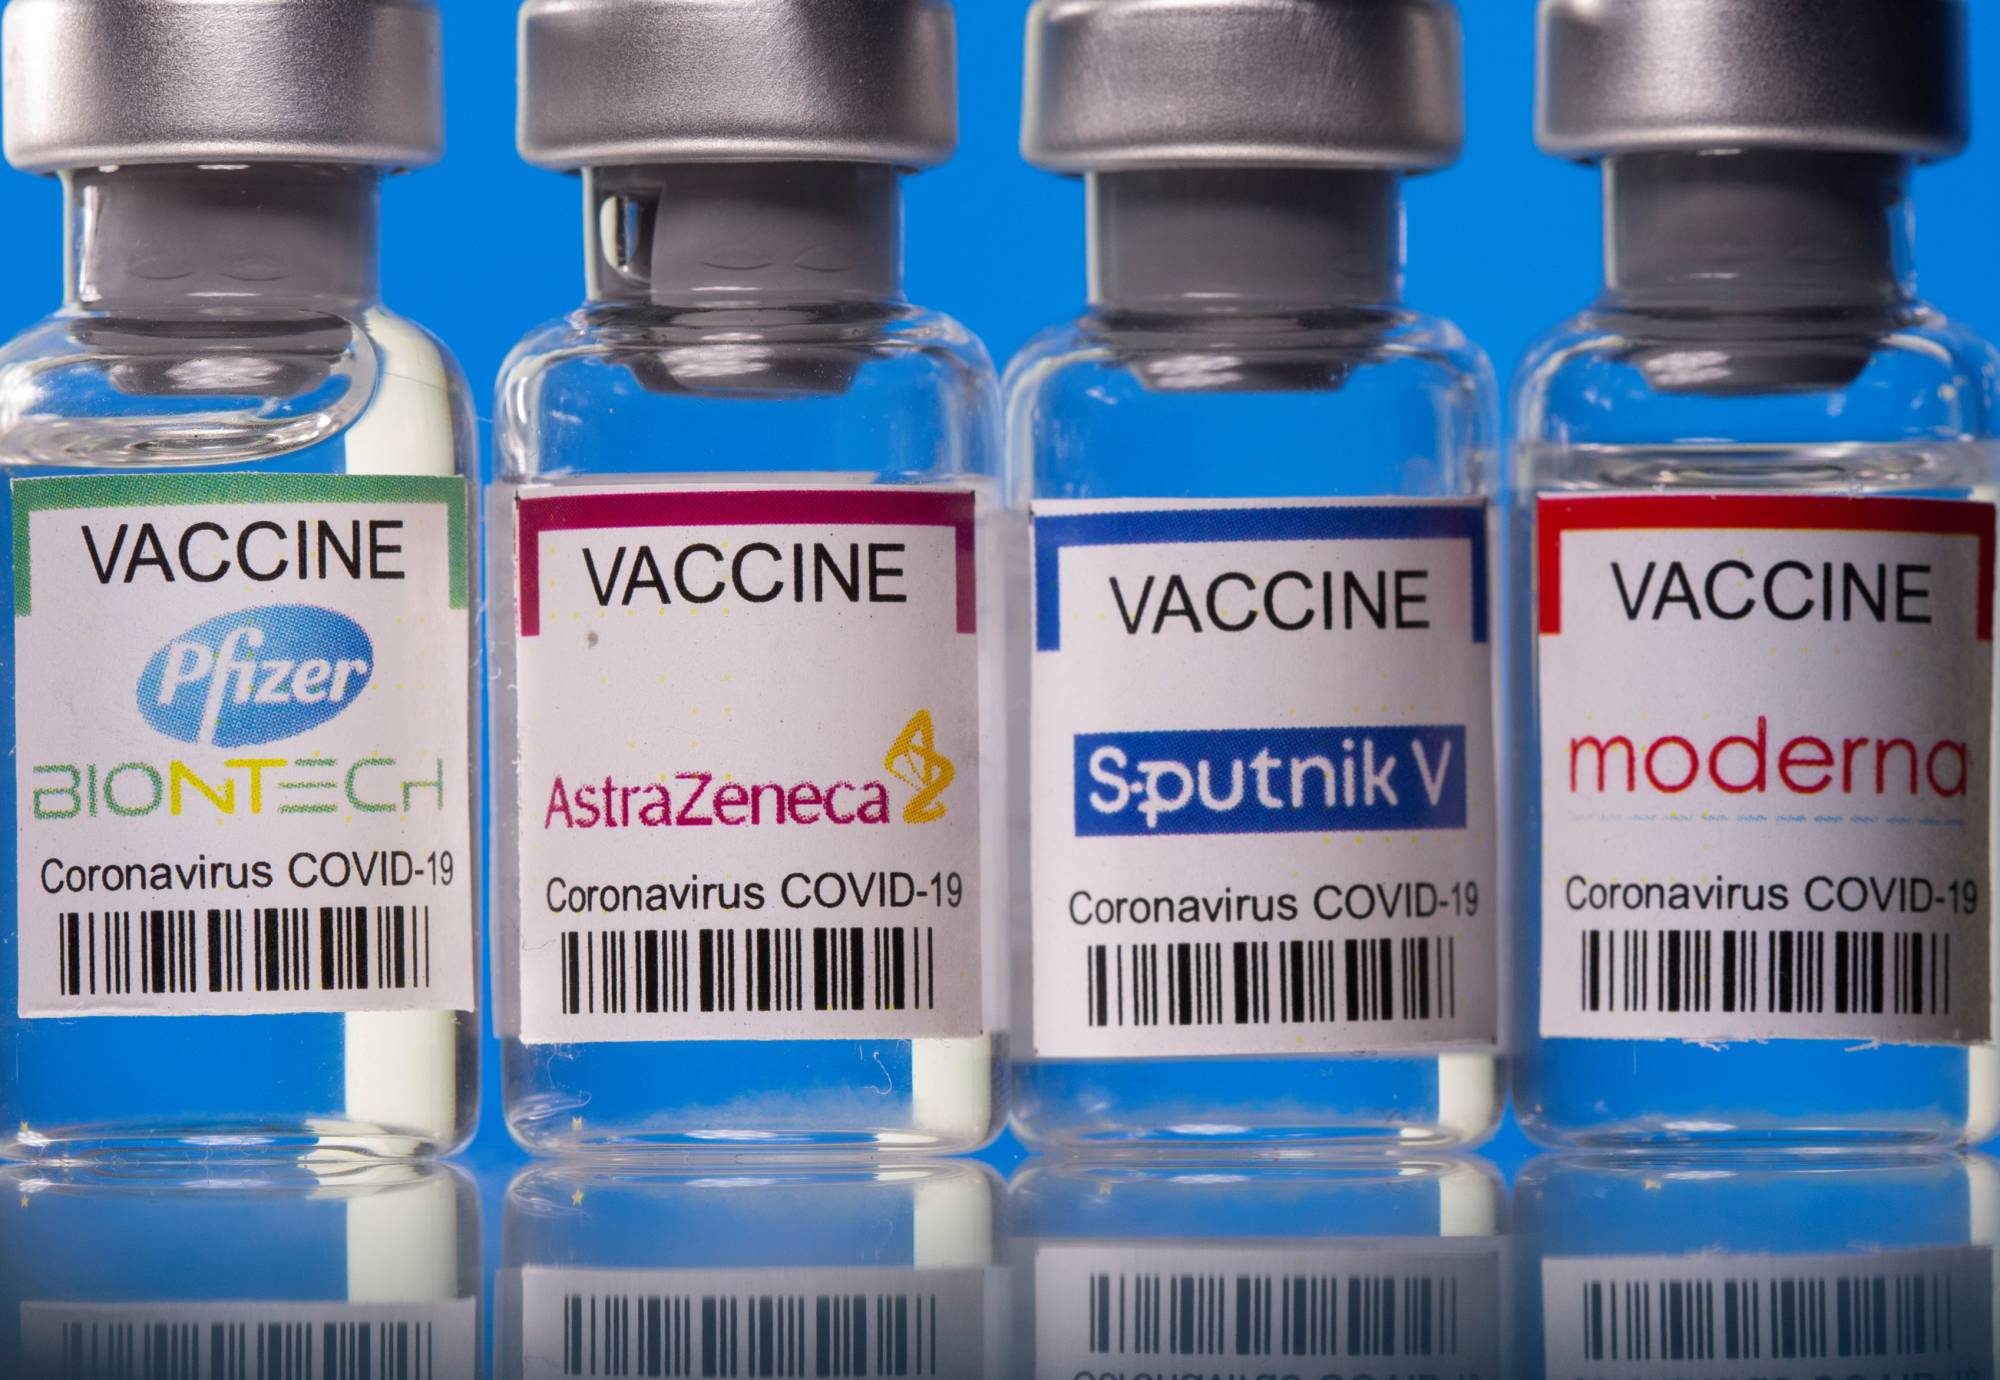 The Moderna and AstraZeneca COVID-19 vaccines were formally approved for use in Japan on Friday. | REUTERS